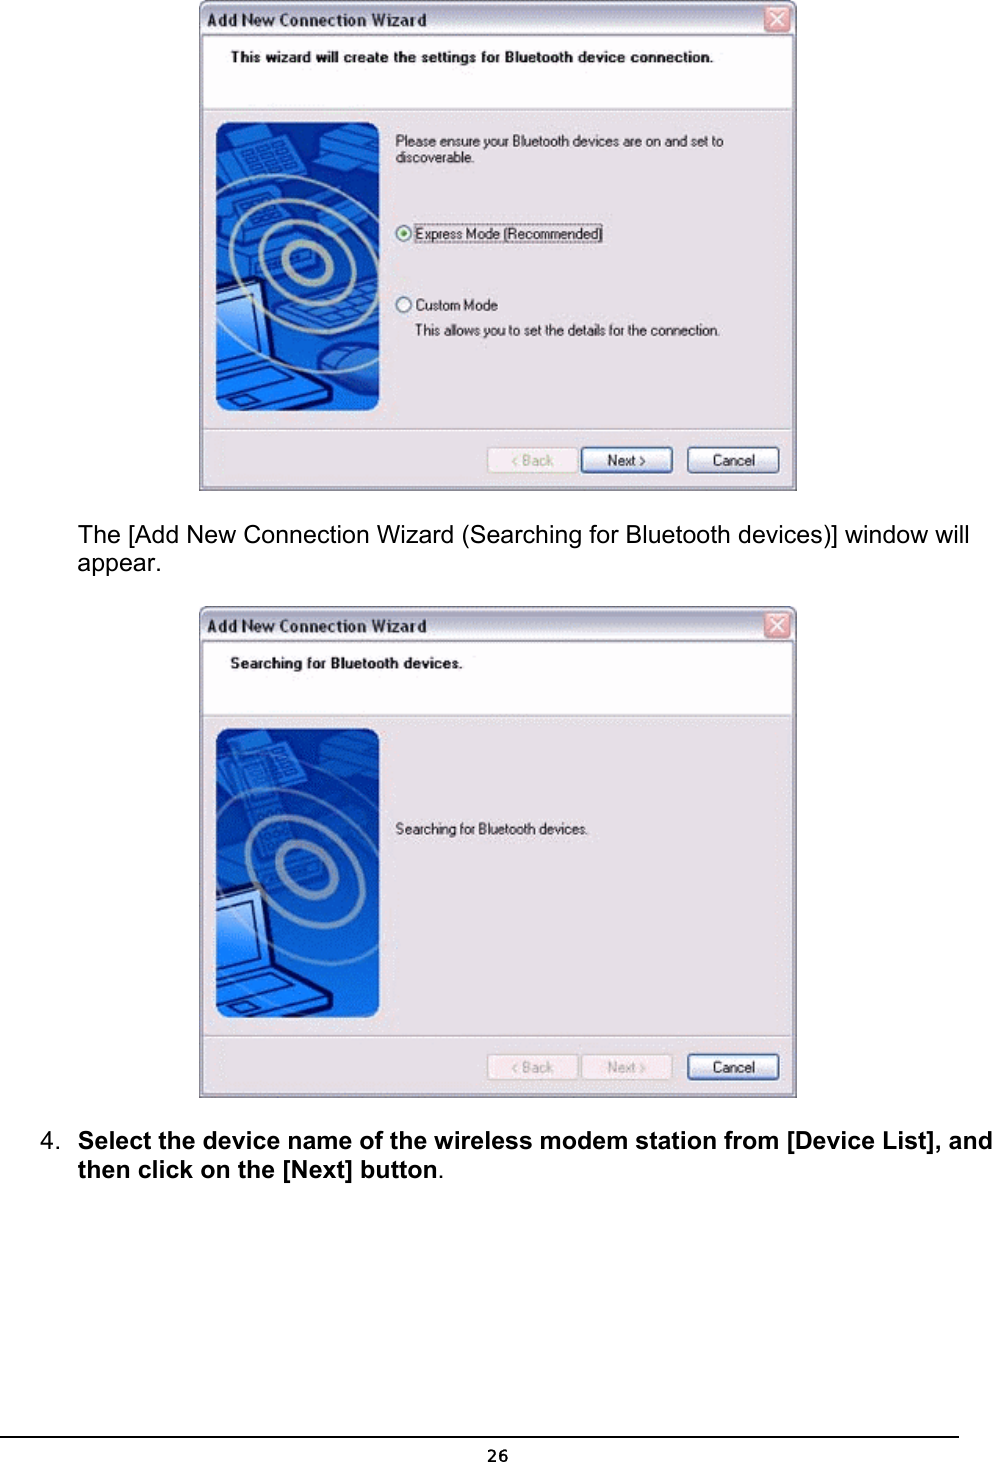   The [Add New Connection Wizard (Searching for Bluetooth devices)] window will appear.  4.  Select the device name of the wireless modem station from [Device List], and then click on the [Next] button.  26